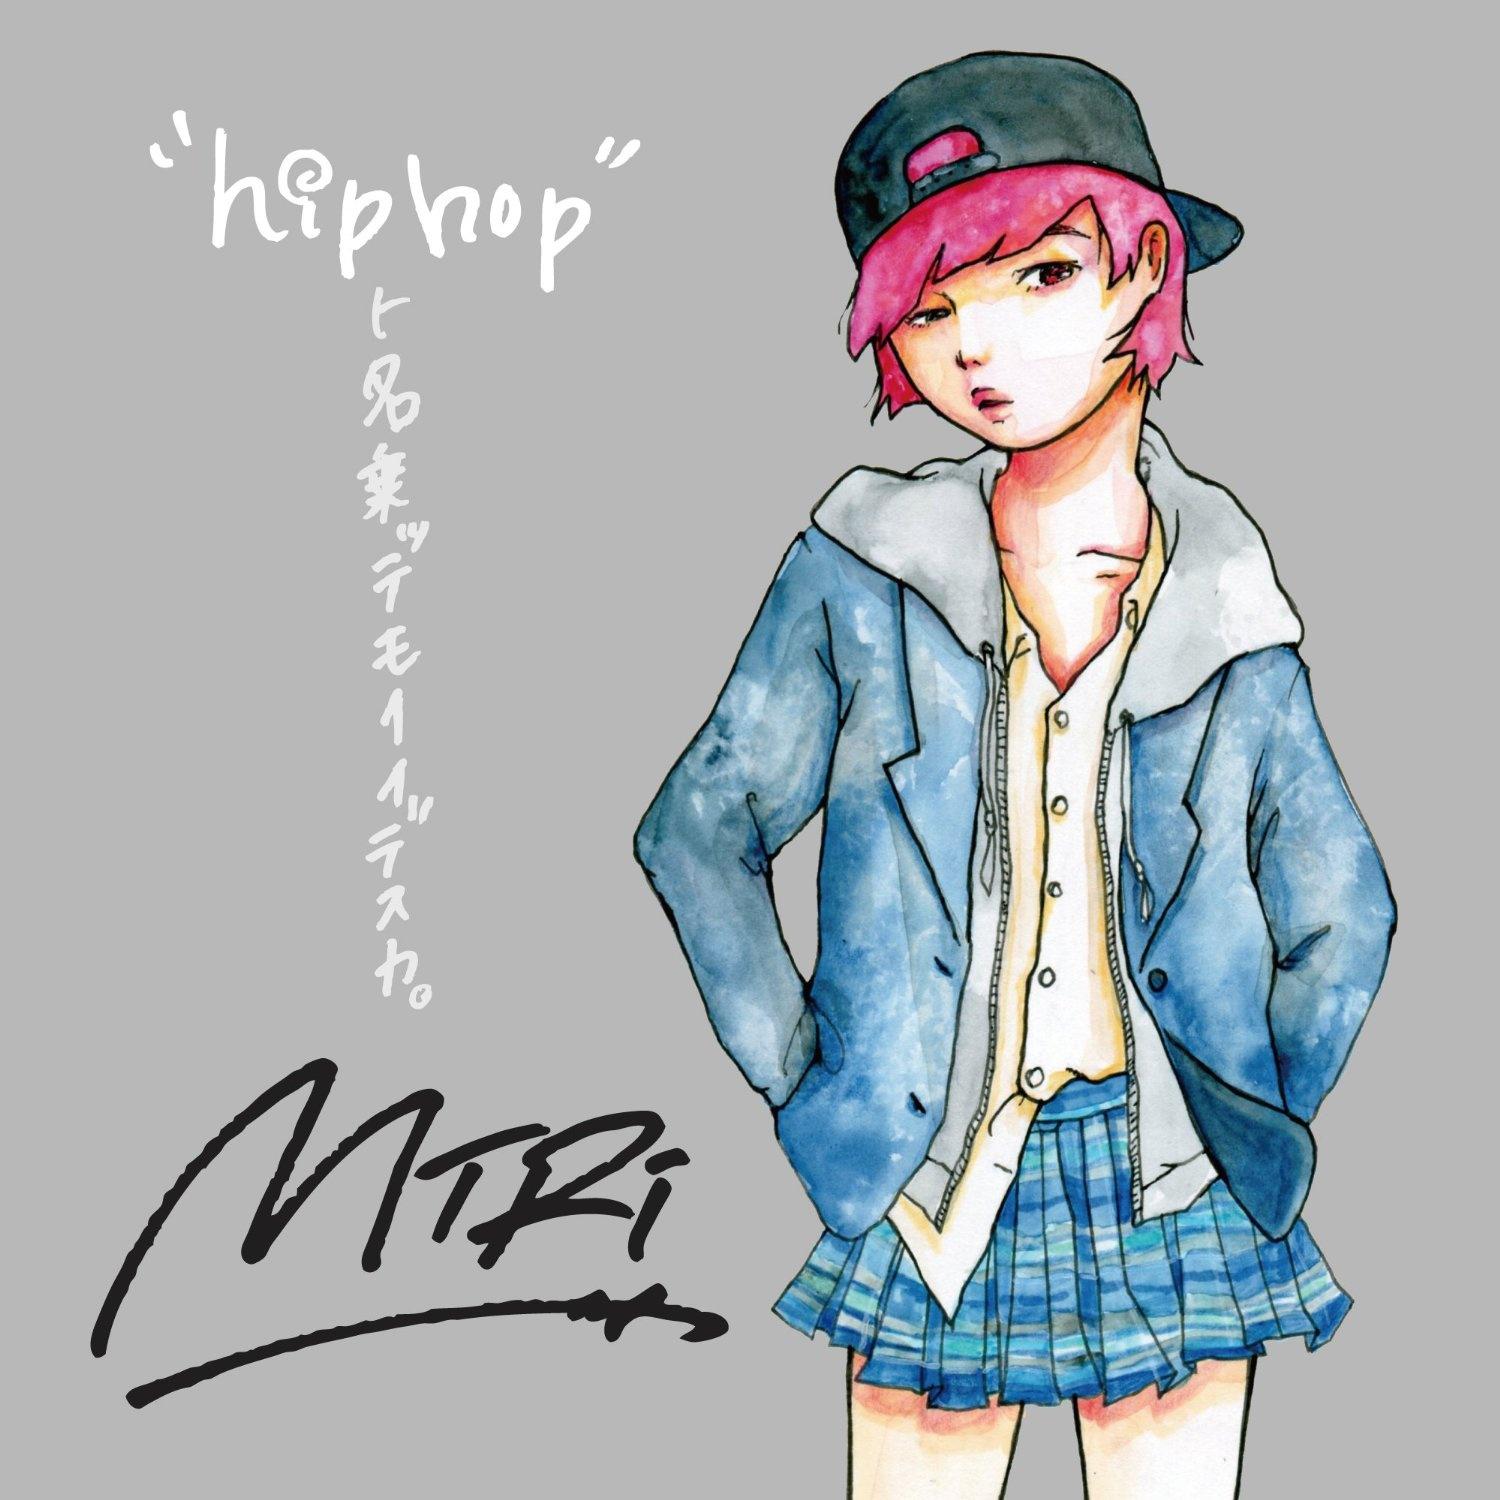 " hiphop" ming cheng